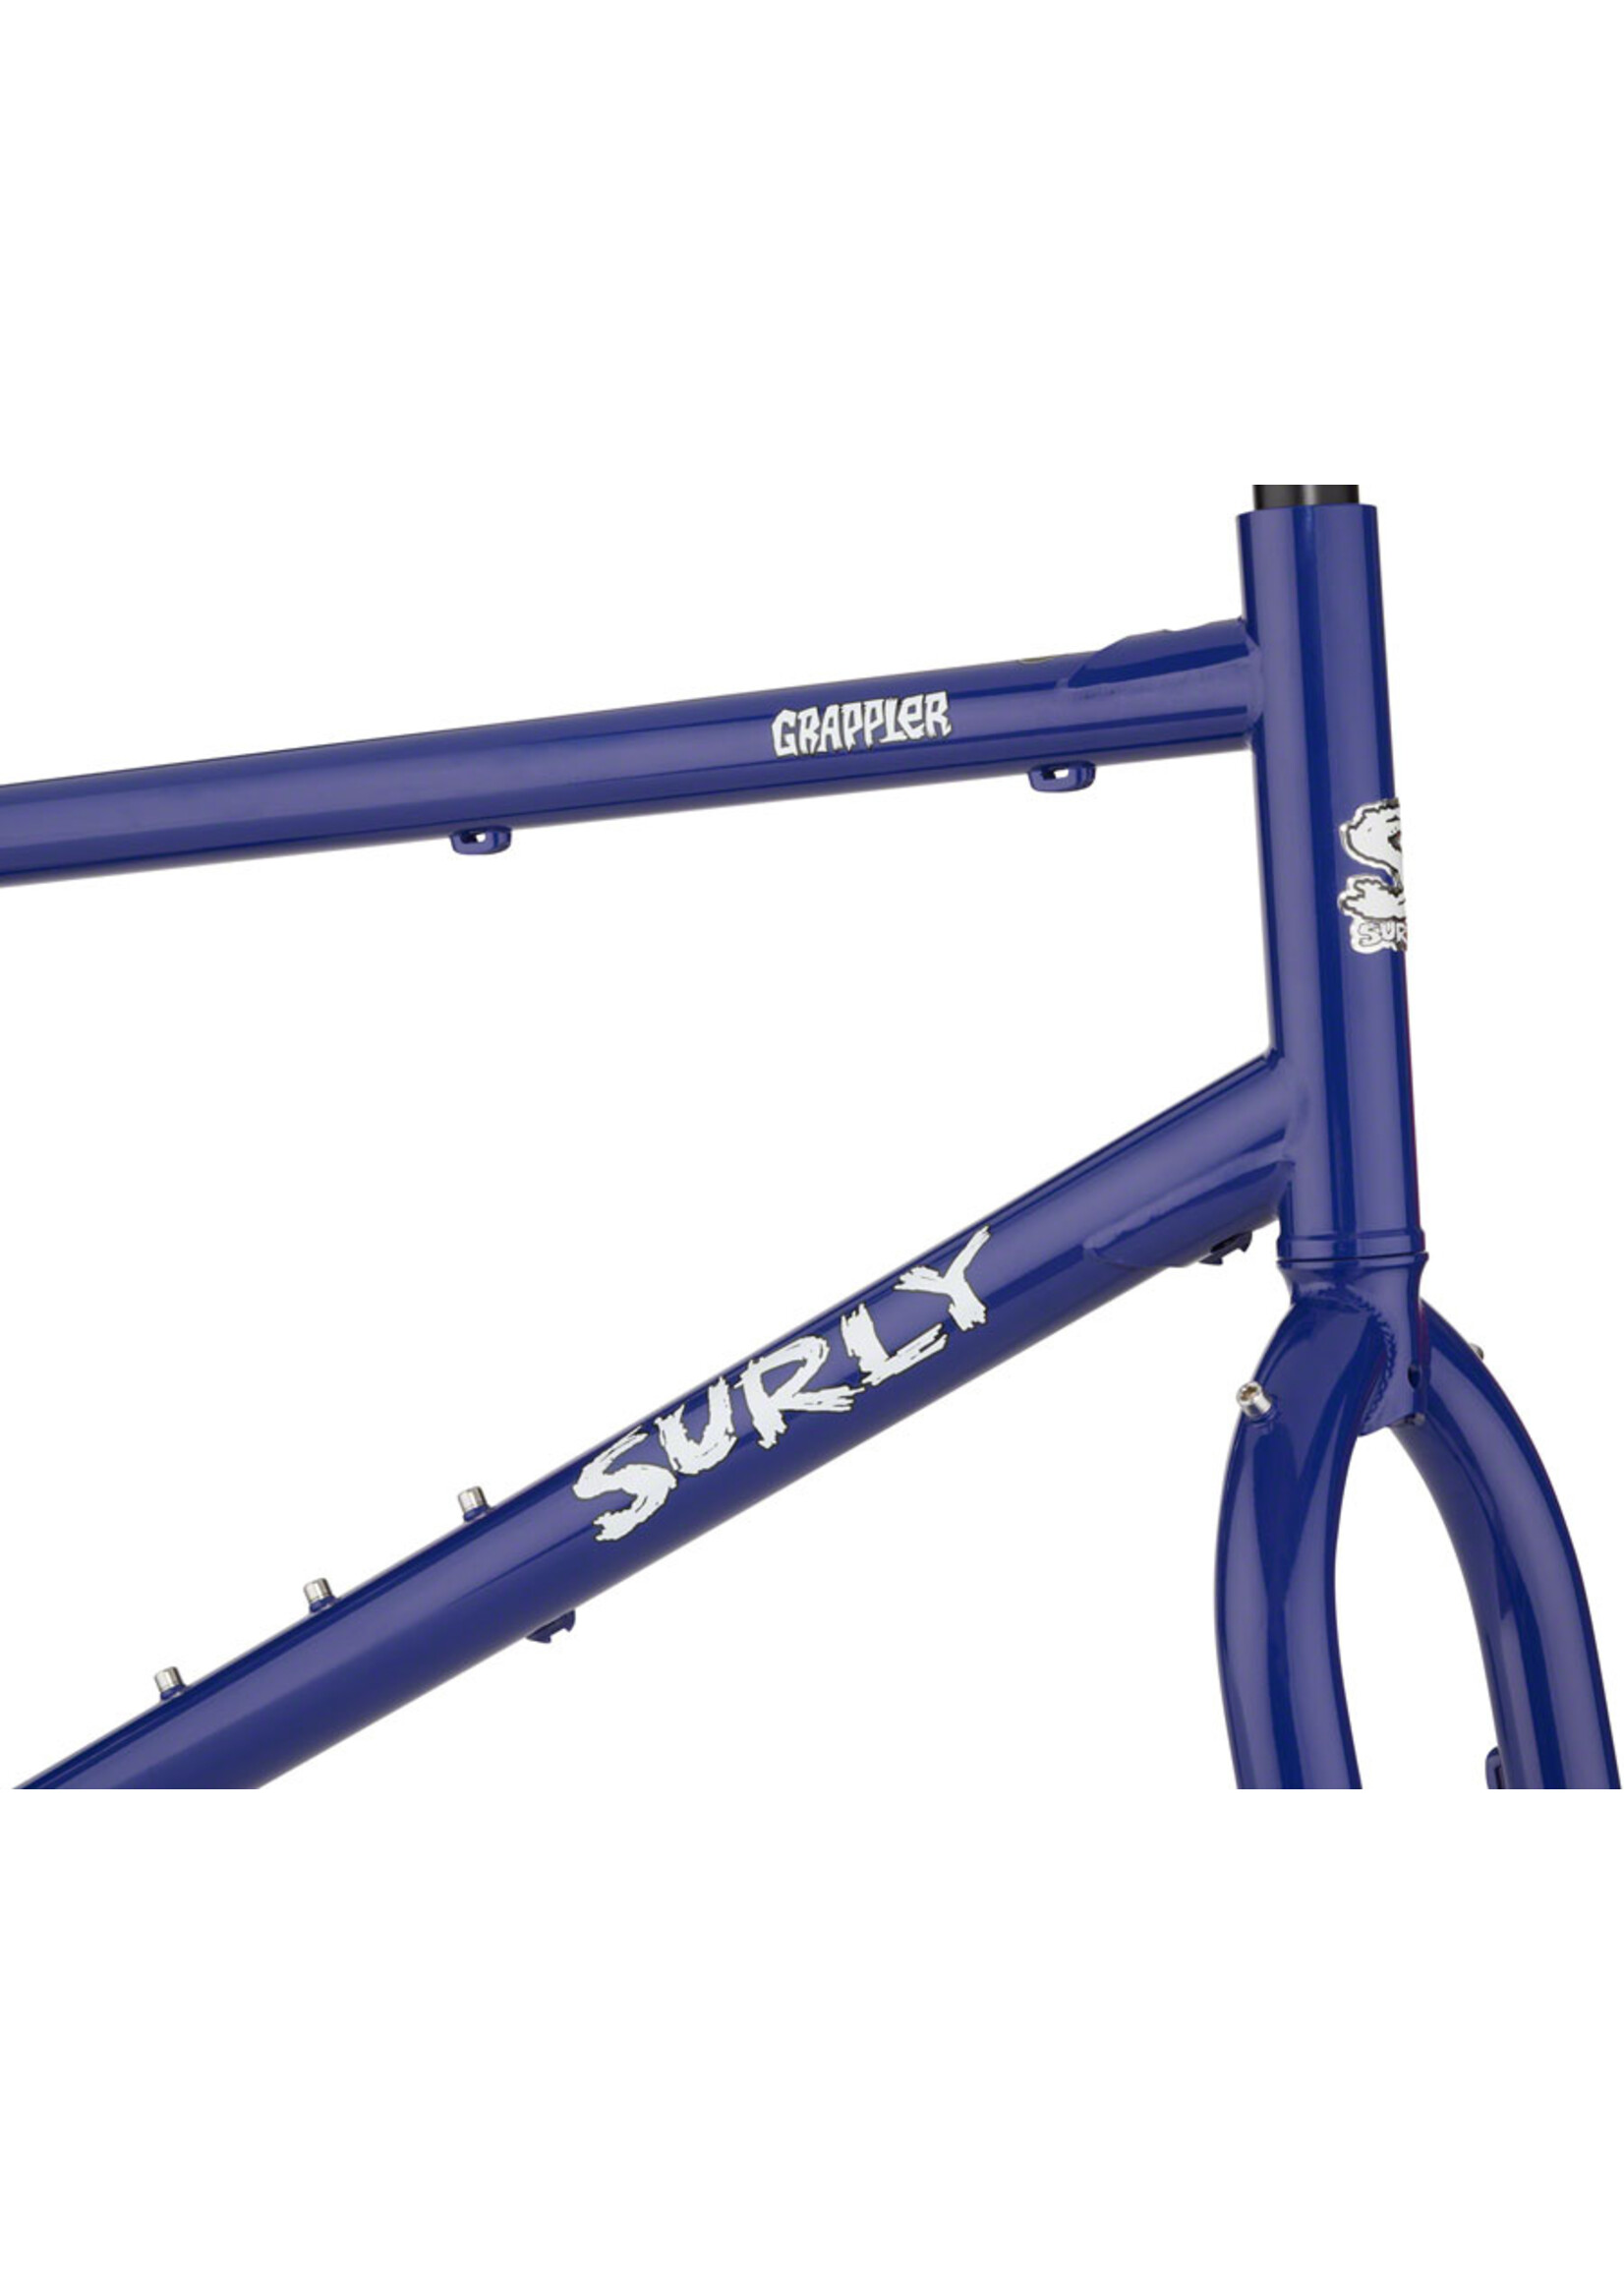 Surly Cadre Surly Grappler